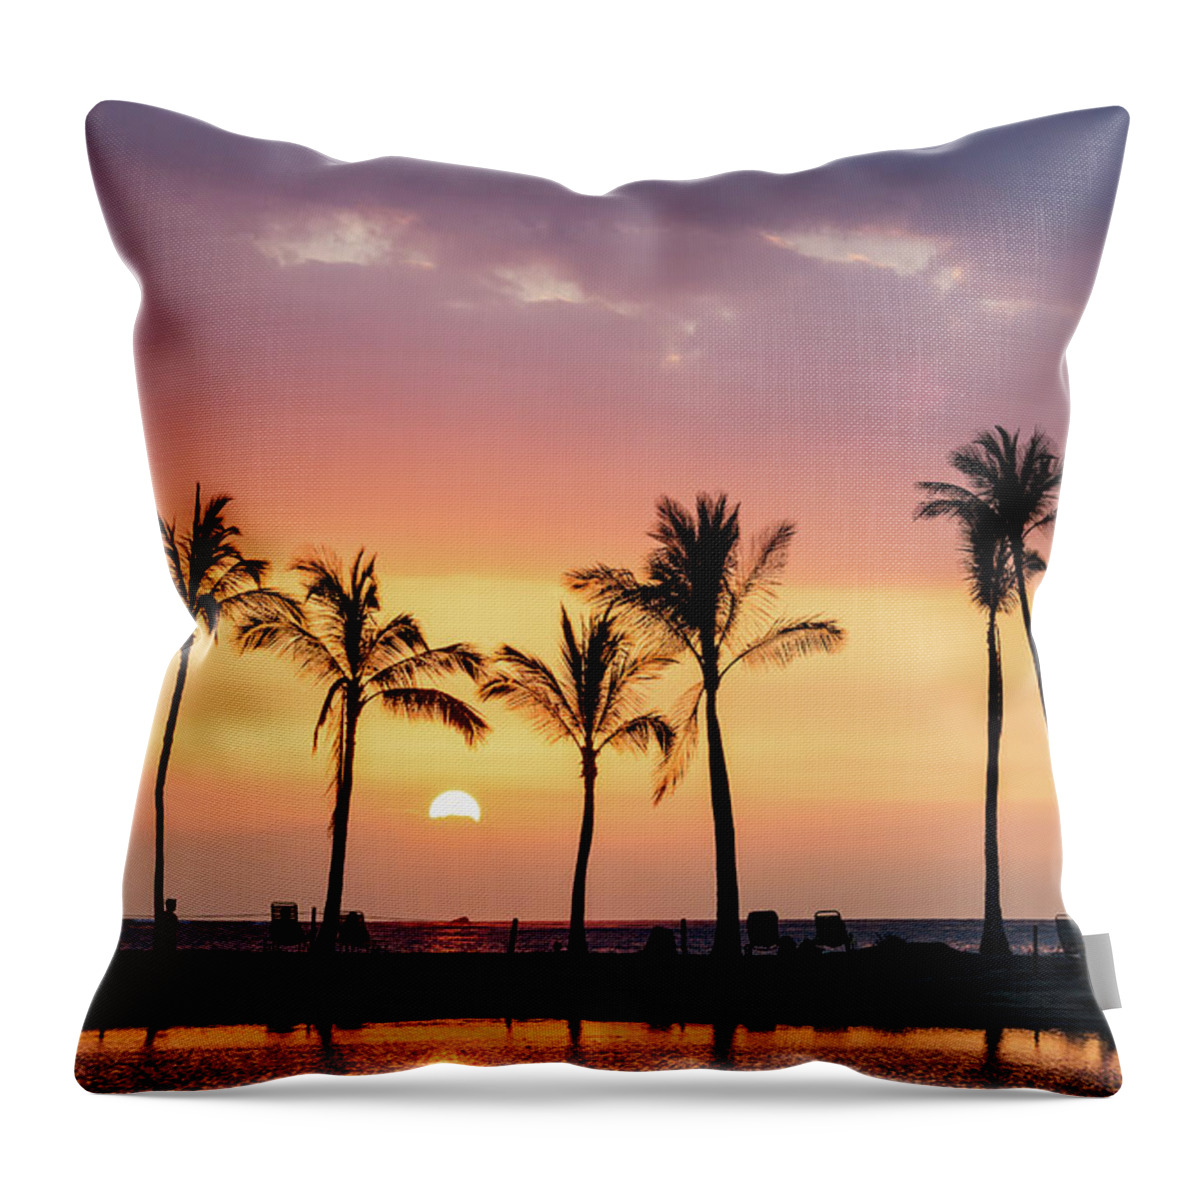 Sunset Throw Pillow featuring the photograph Hawaiian Sunset by Nicole Young